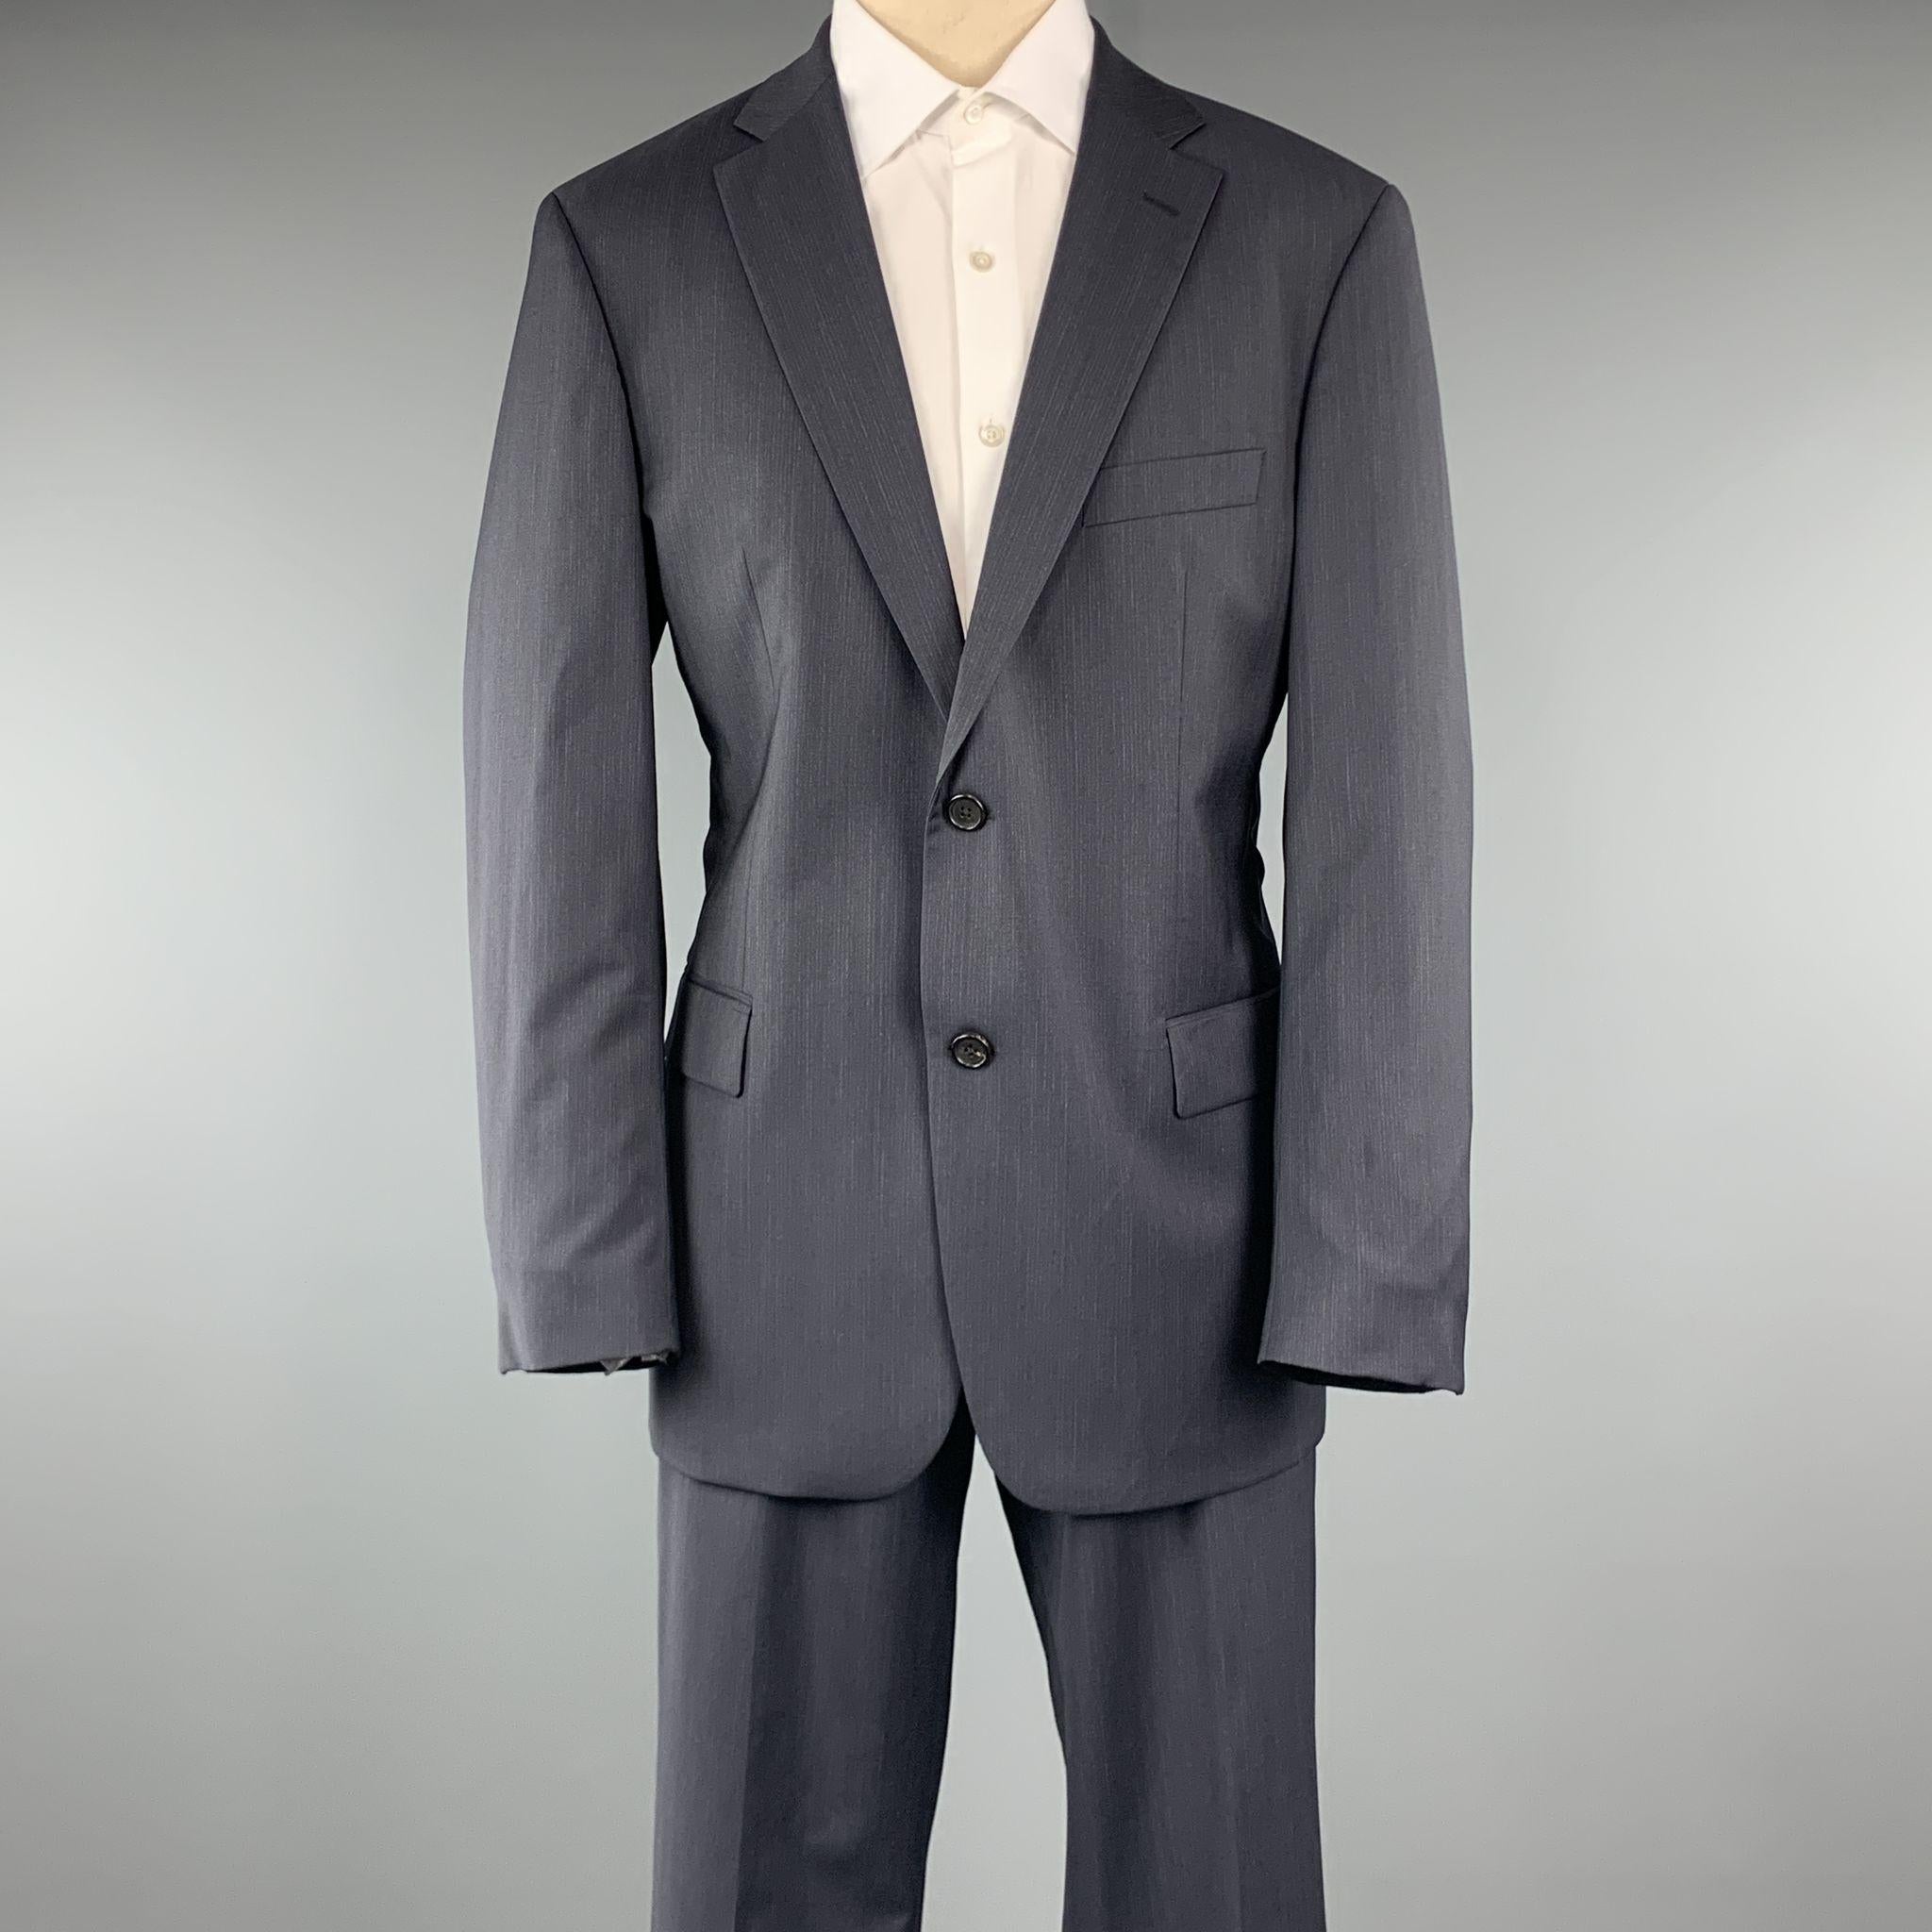 HUGO BOSS Suit comes in a charcoal pinstripe virgin wool and includes a single breasted, two button sport coat with a notch lapel and matching front trousers. Made in USA

Excellent Pre-Owned Condition.
Marked: 42

Measurements:

-Jacket
Shoulder: